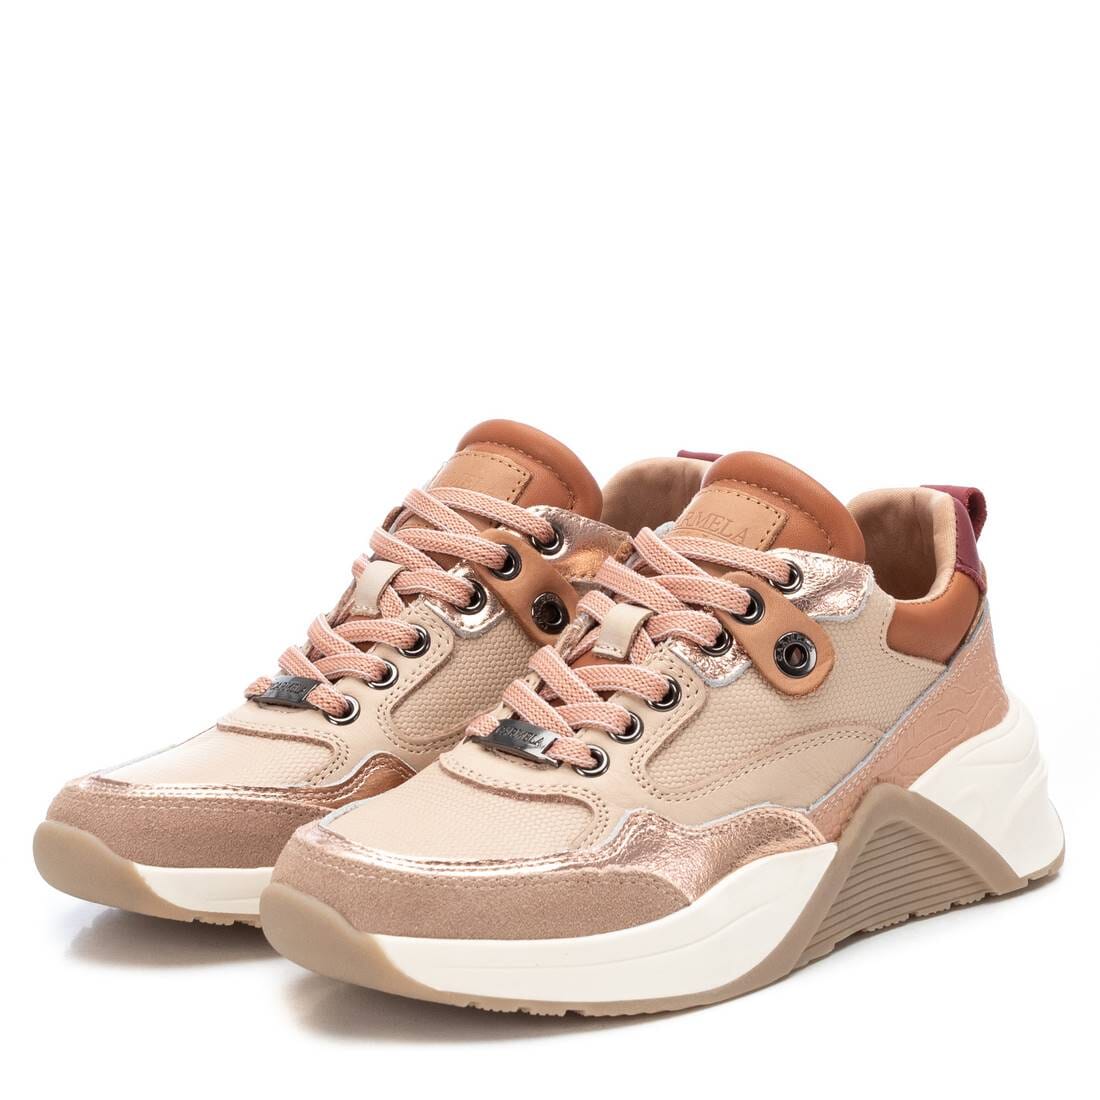 160259 Spanish Leather sneakers with colour blocking detail in beige/pink sneakers Sam Star shoes 